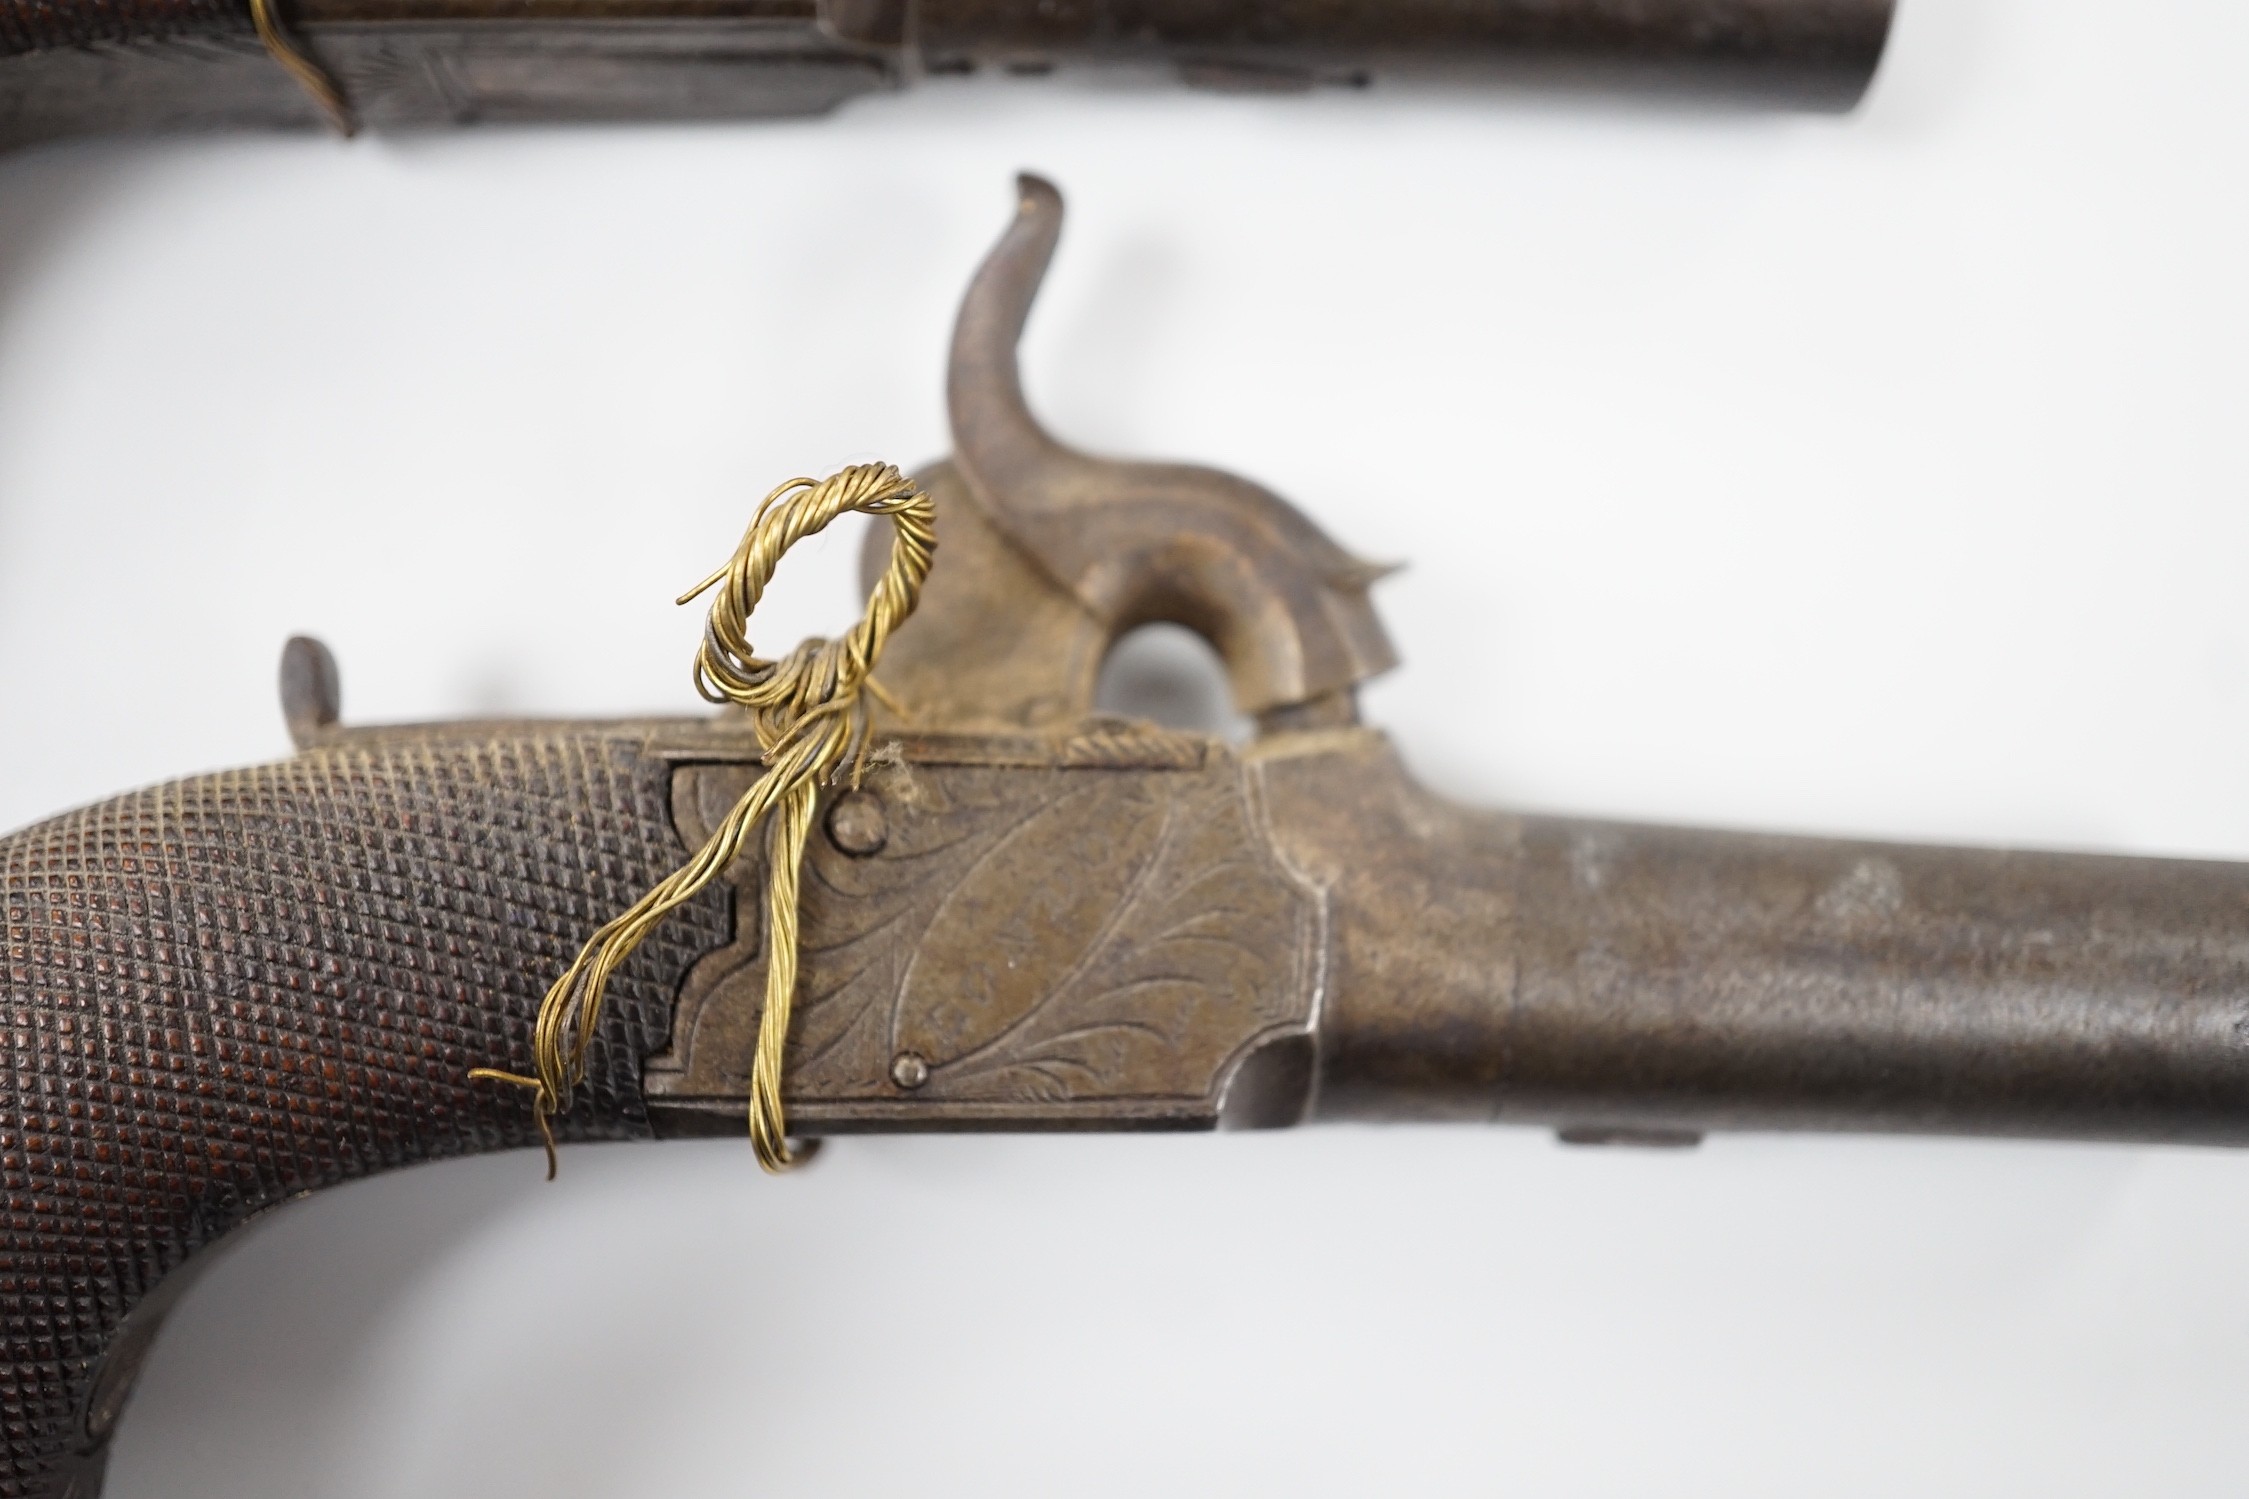 A pair of 19th century Smith of London percussion cap muff pistols, 12.5cm